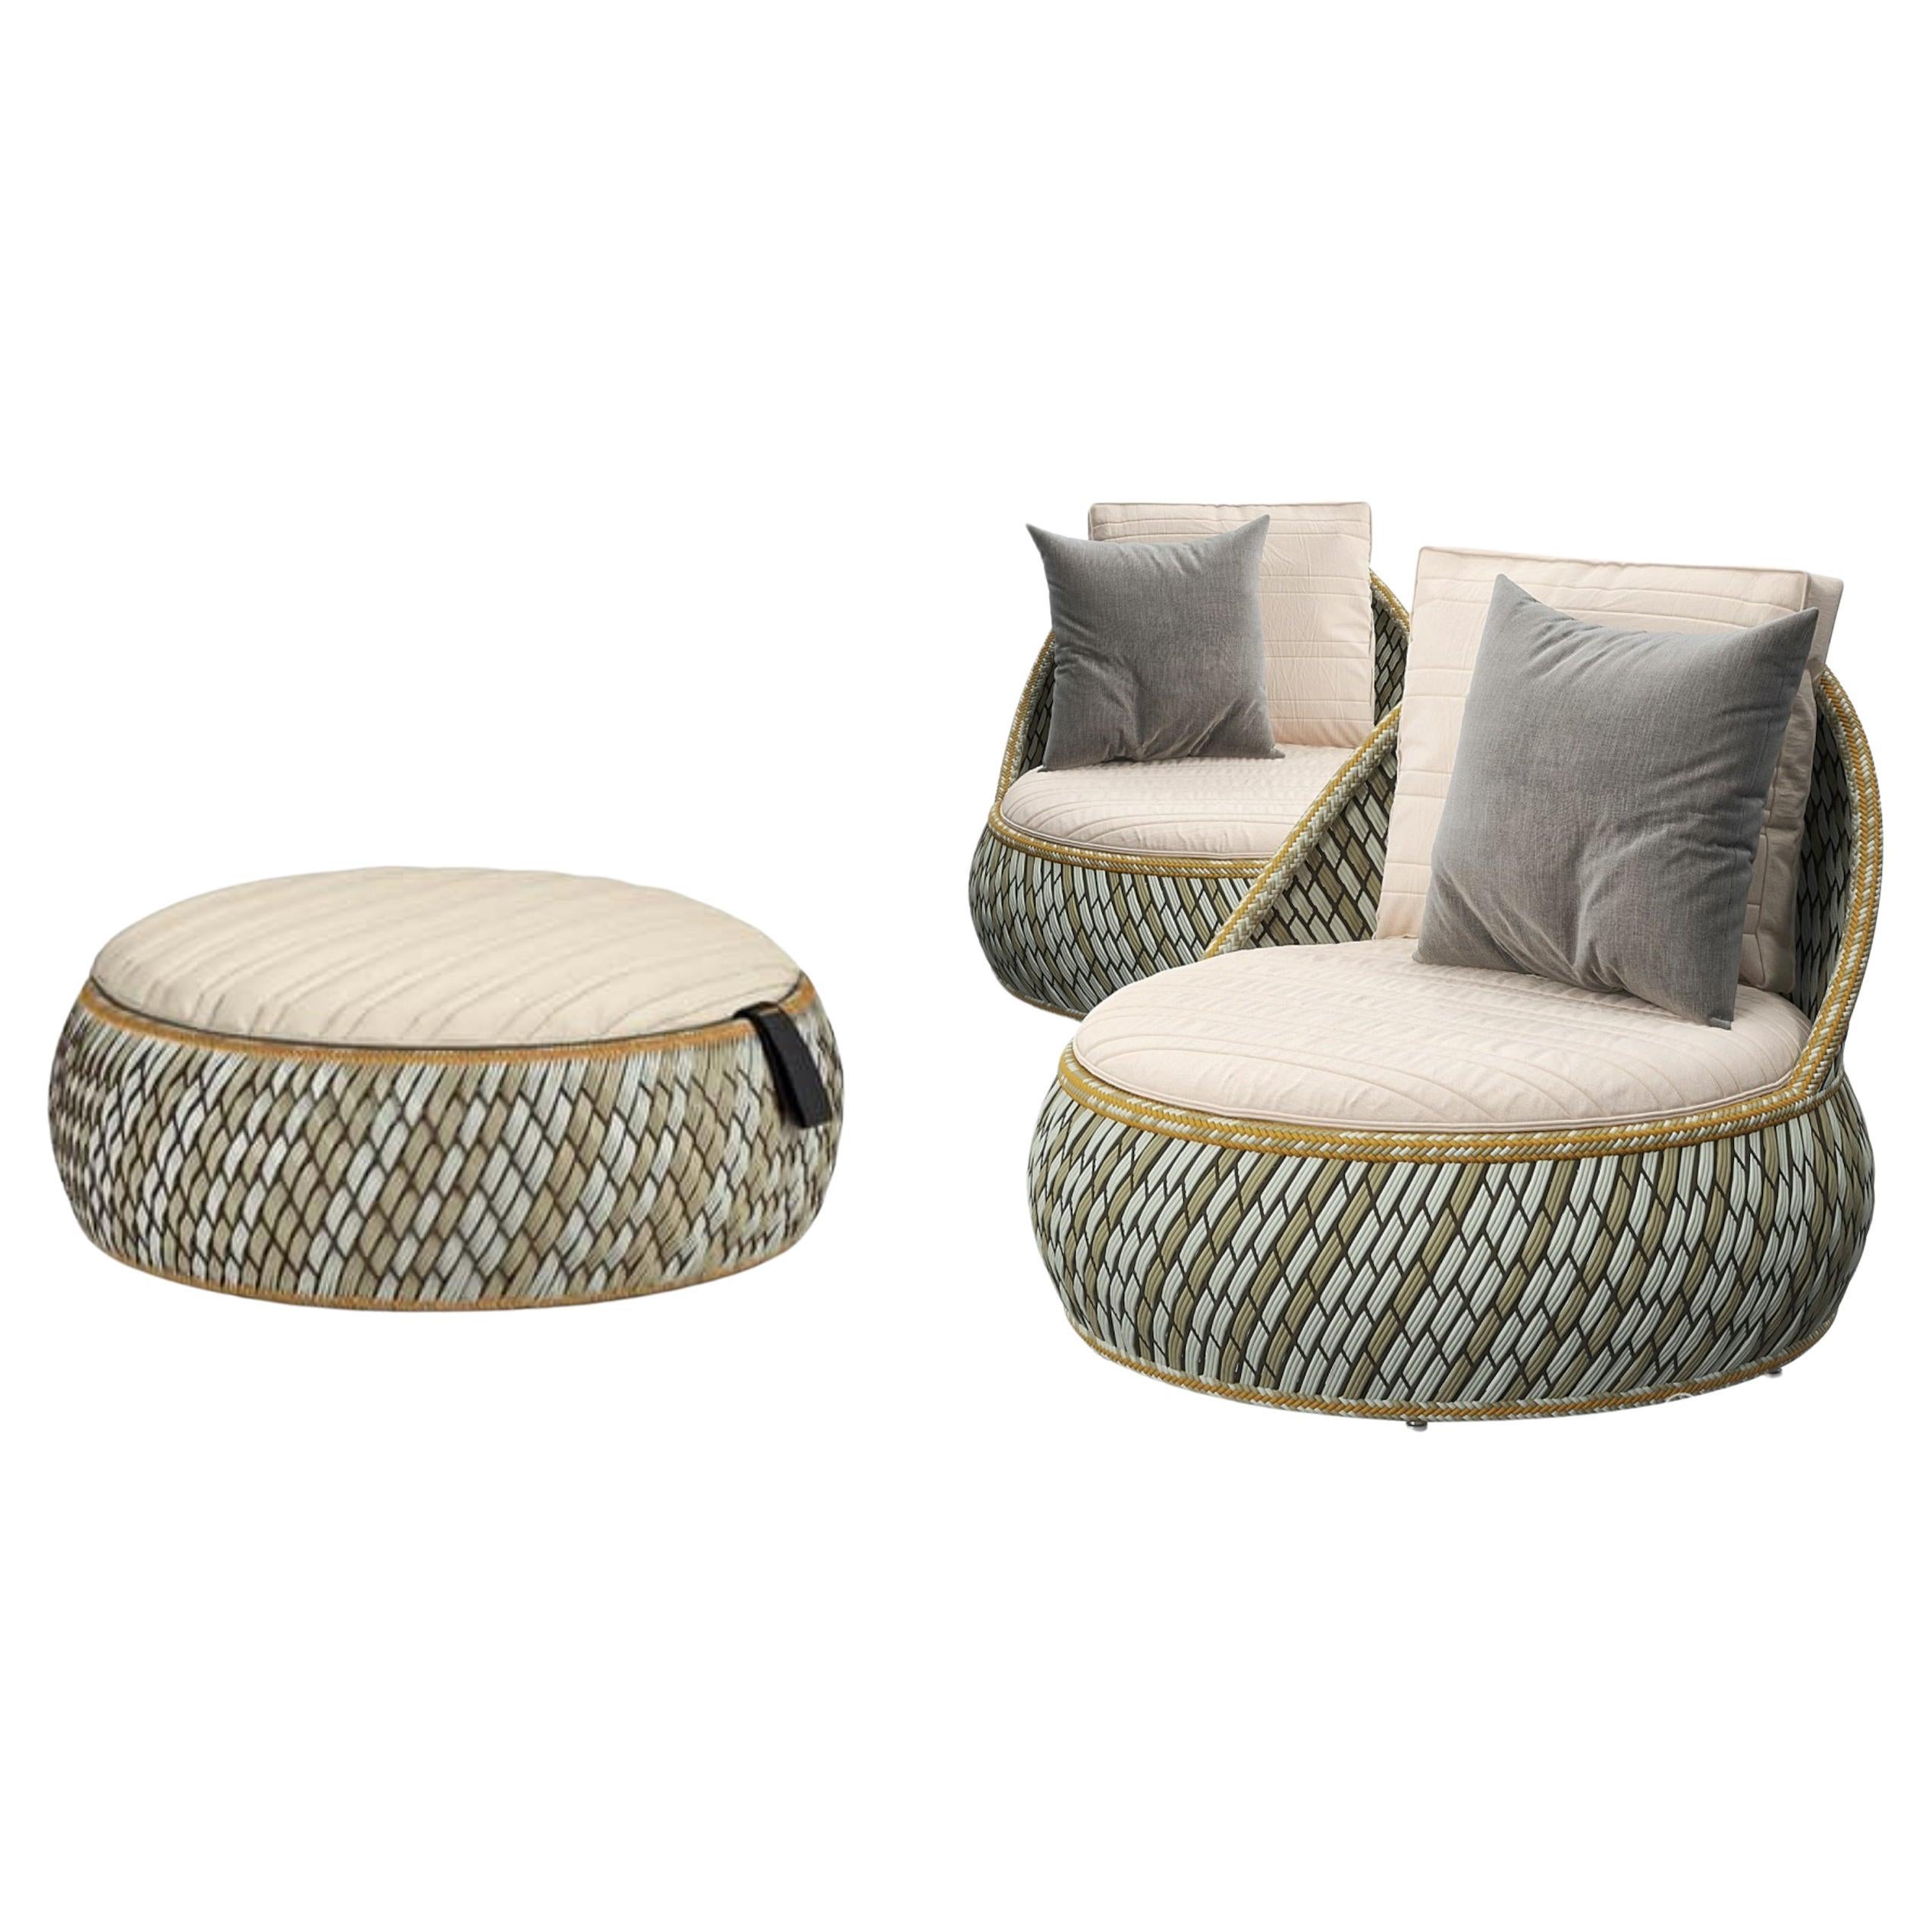 21st Century German Dala Lounge Chairs and a Footstool by Dedon